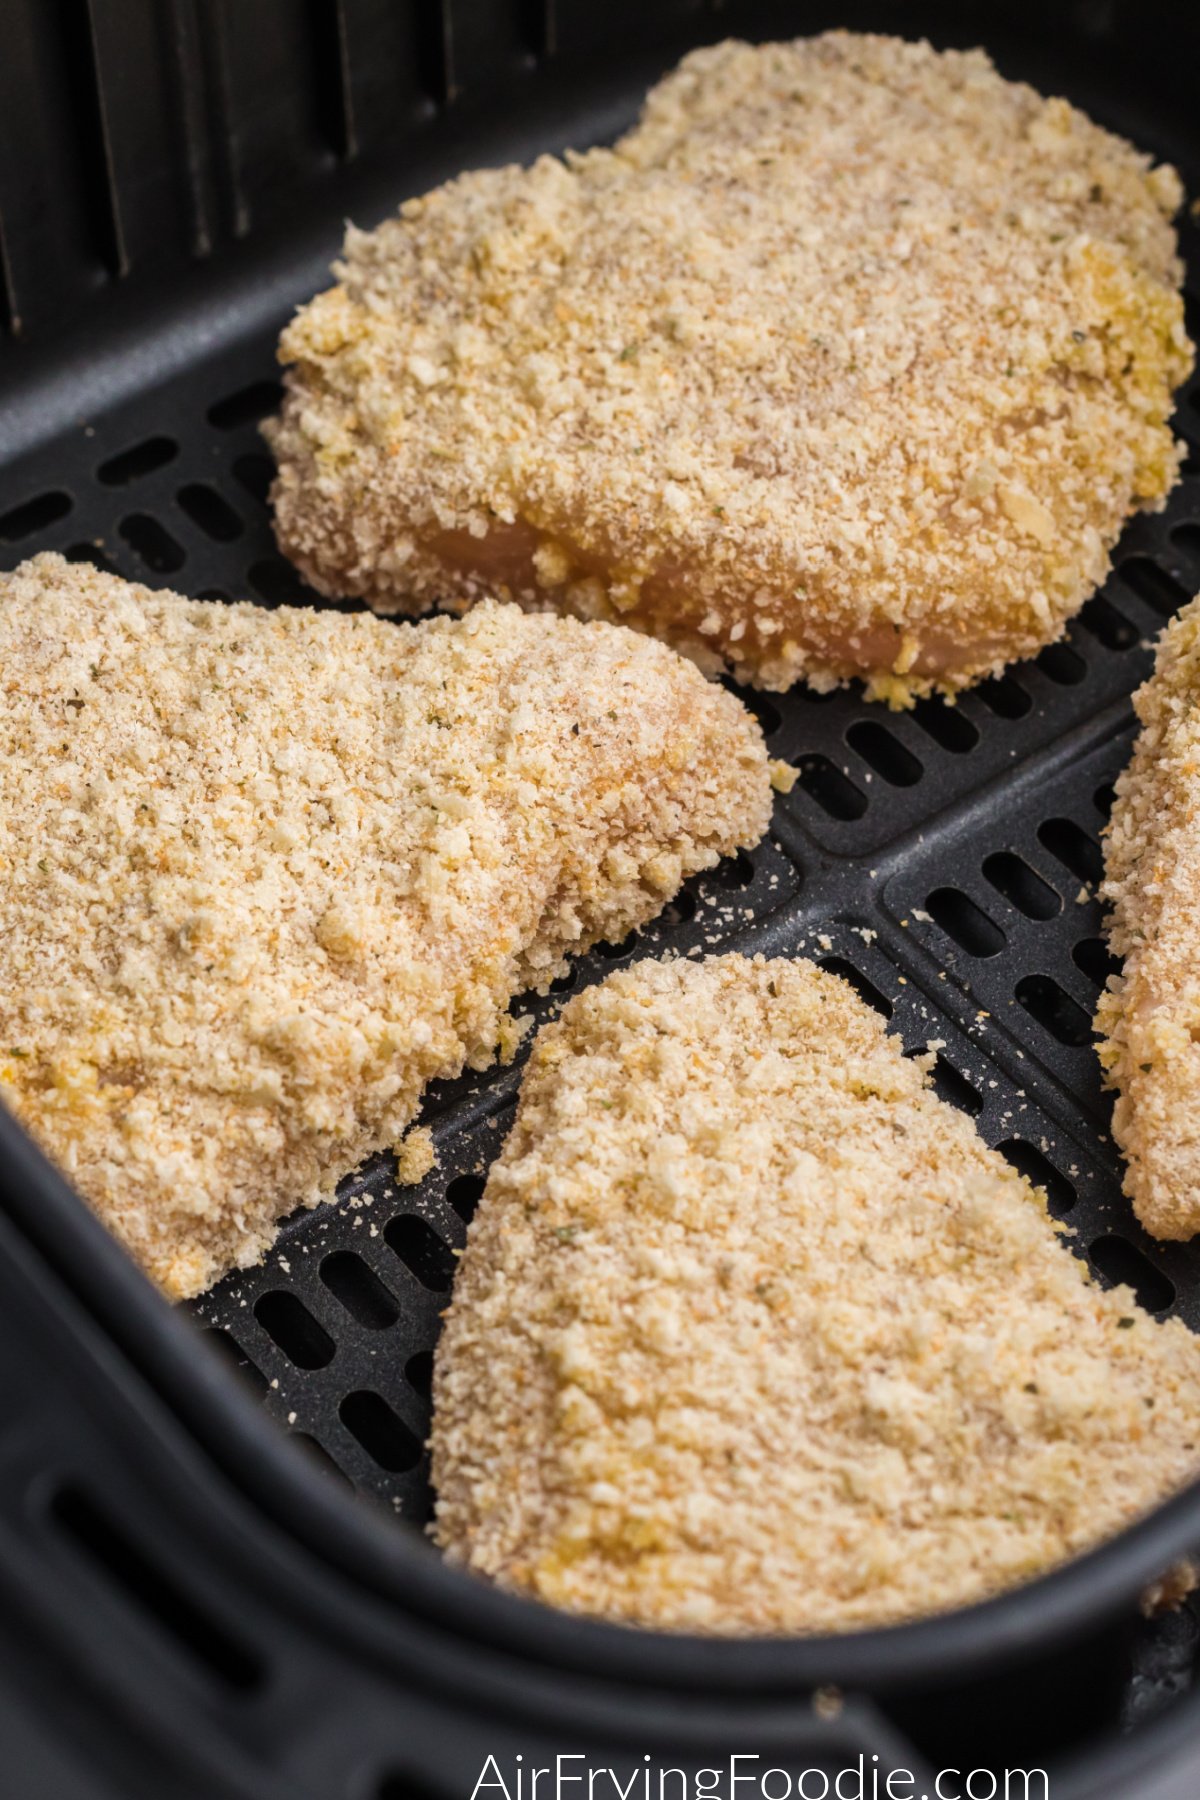 Coated parmesan chicken in the basket of the air fryer.